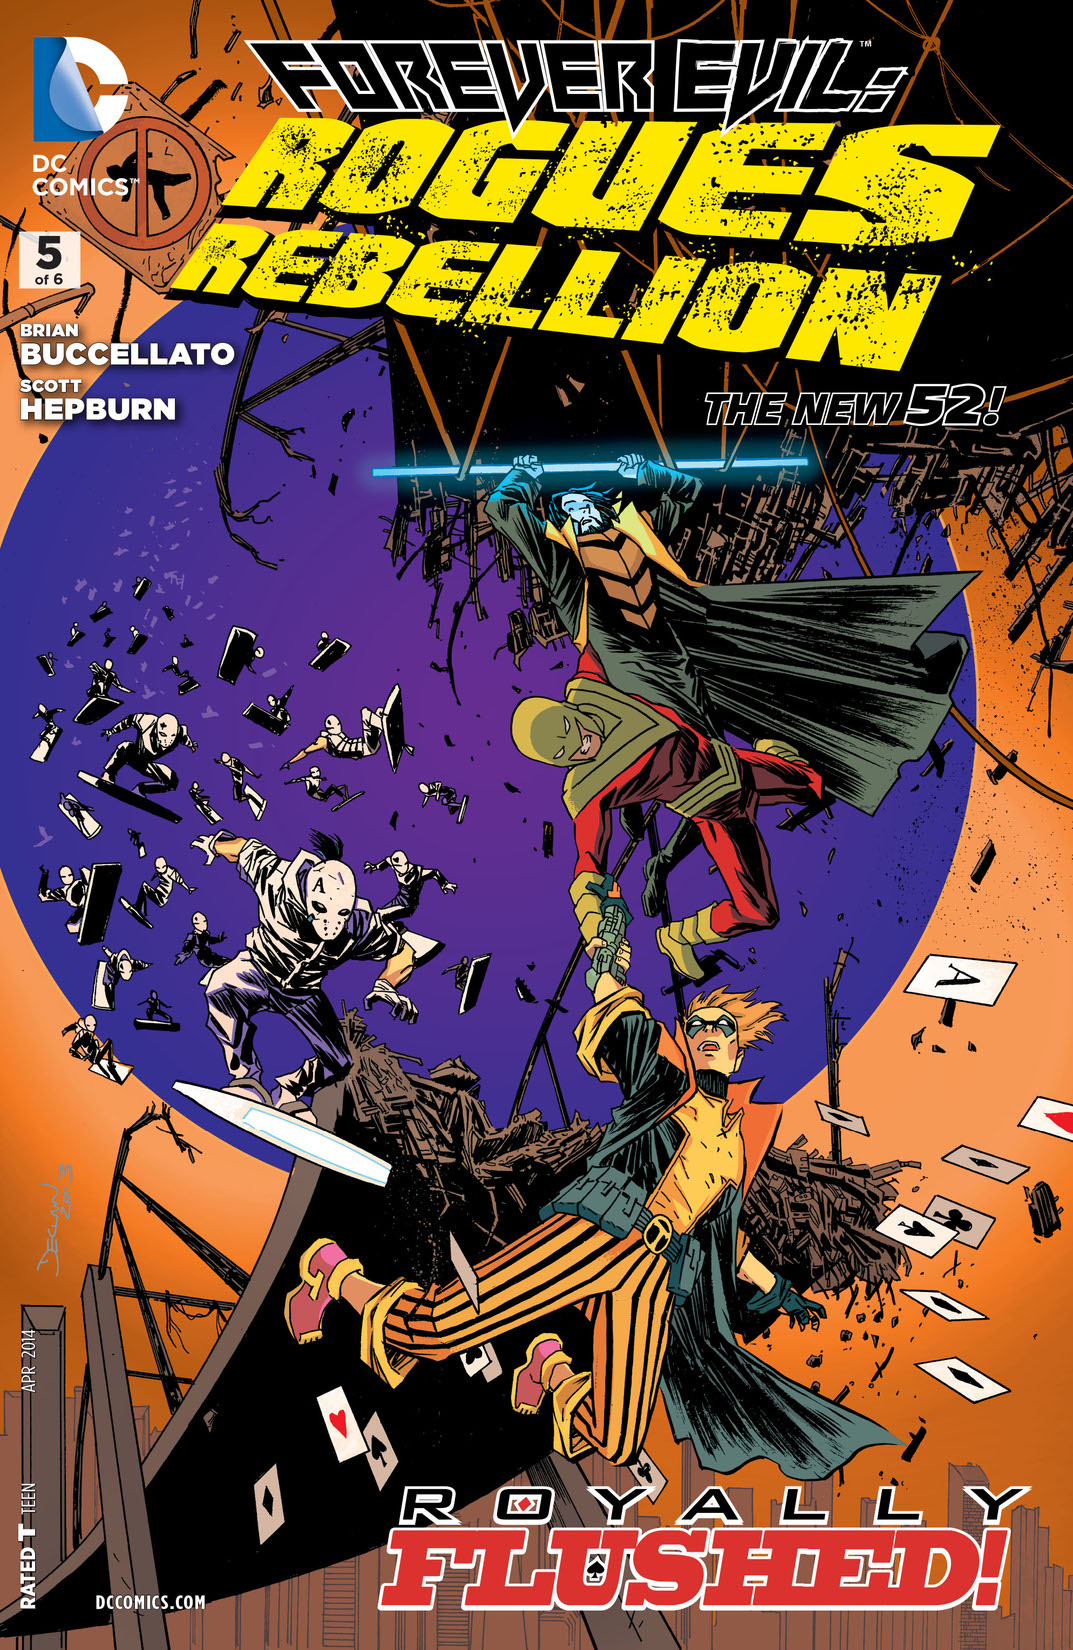 Forever Evil: Rogues Rebellion #5 preview images